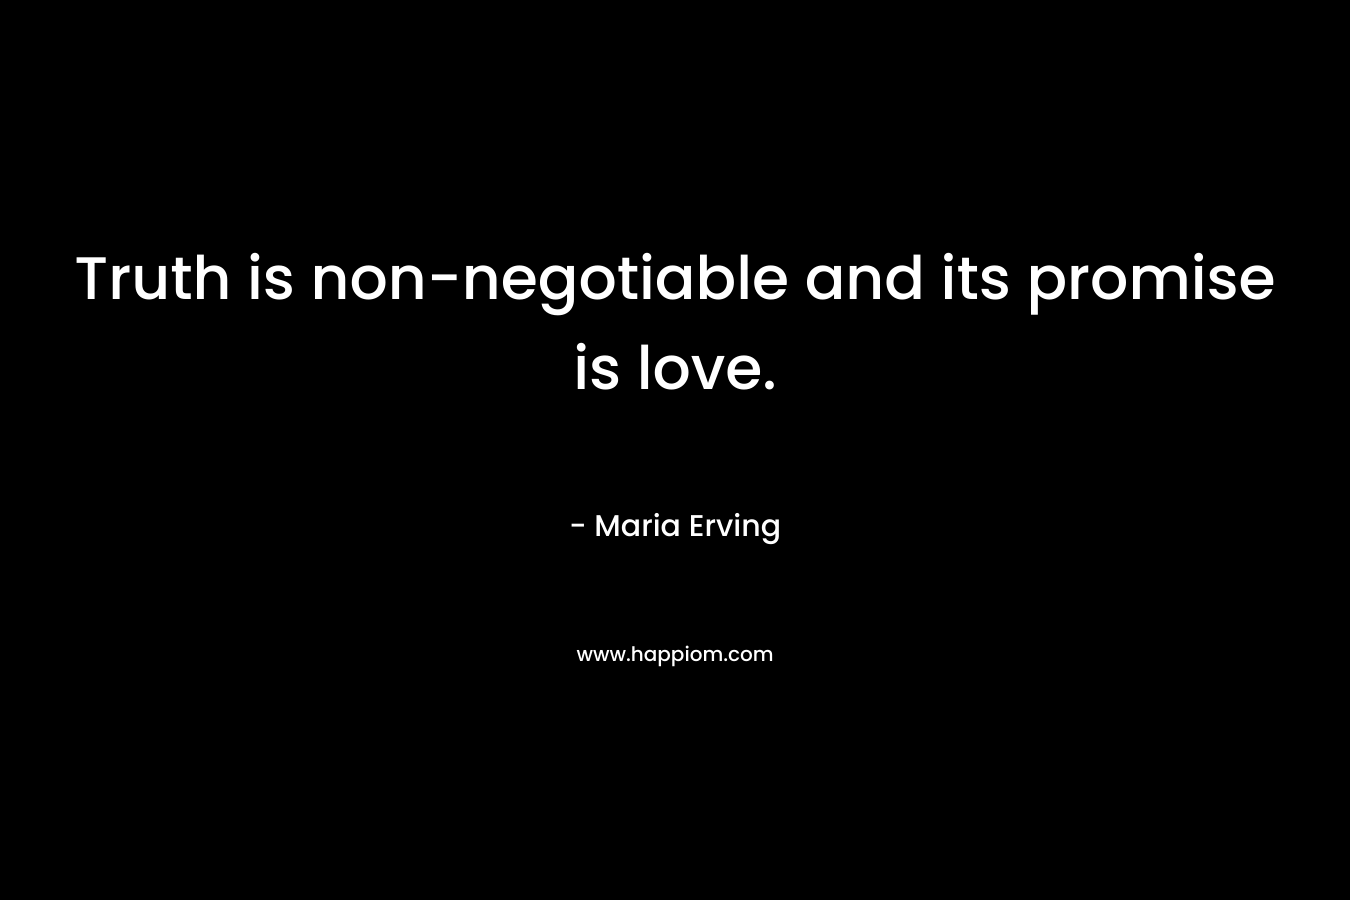 Truth is non-negotiable and its promise is love. – Maria Erving